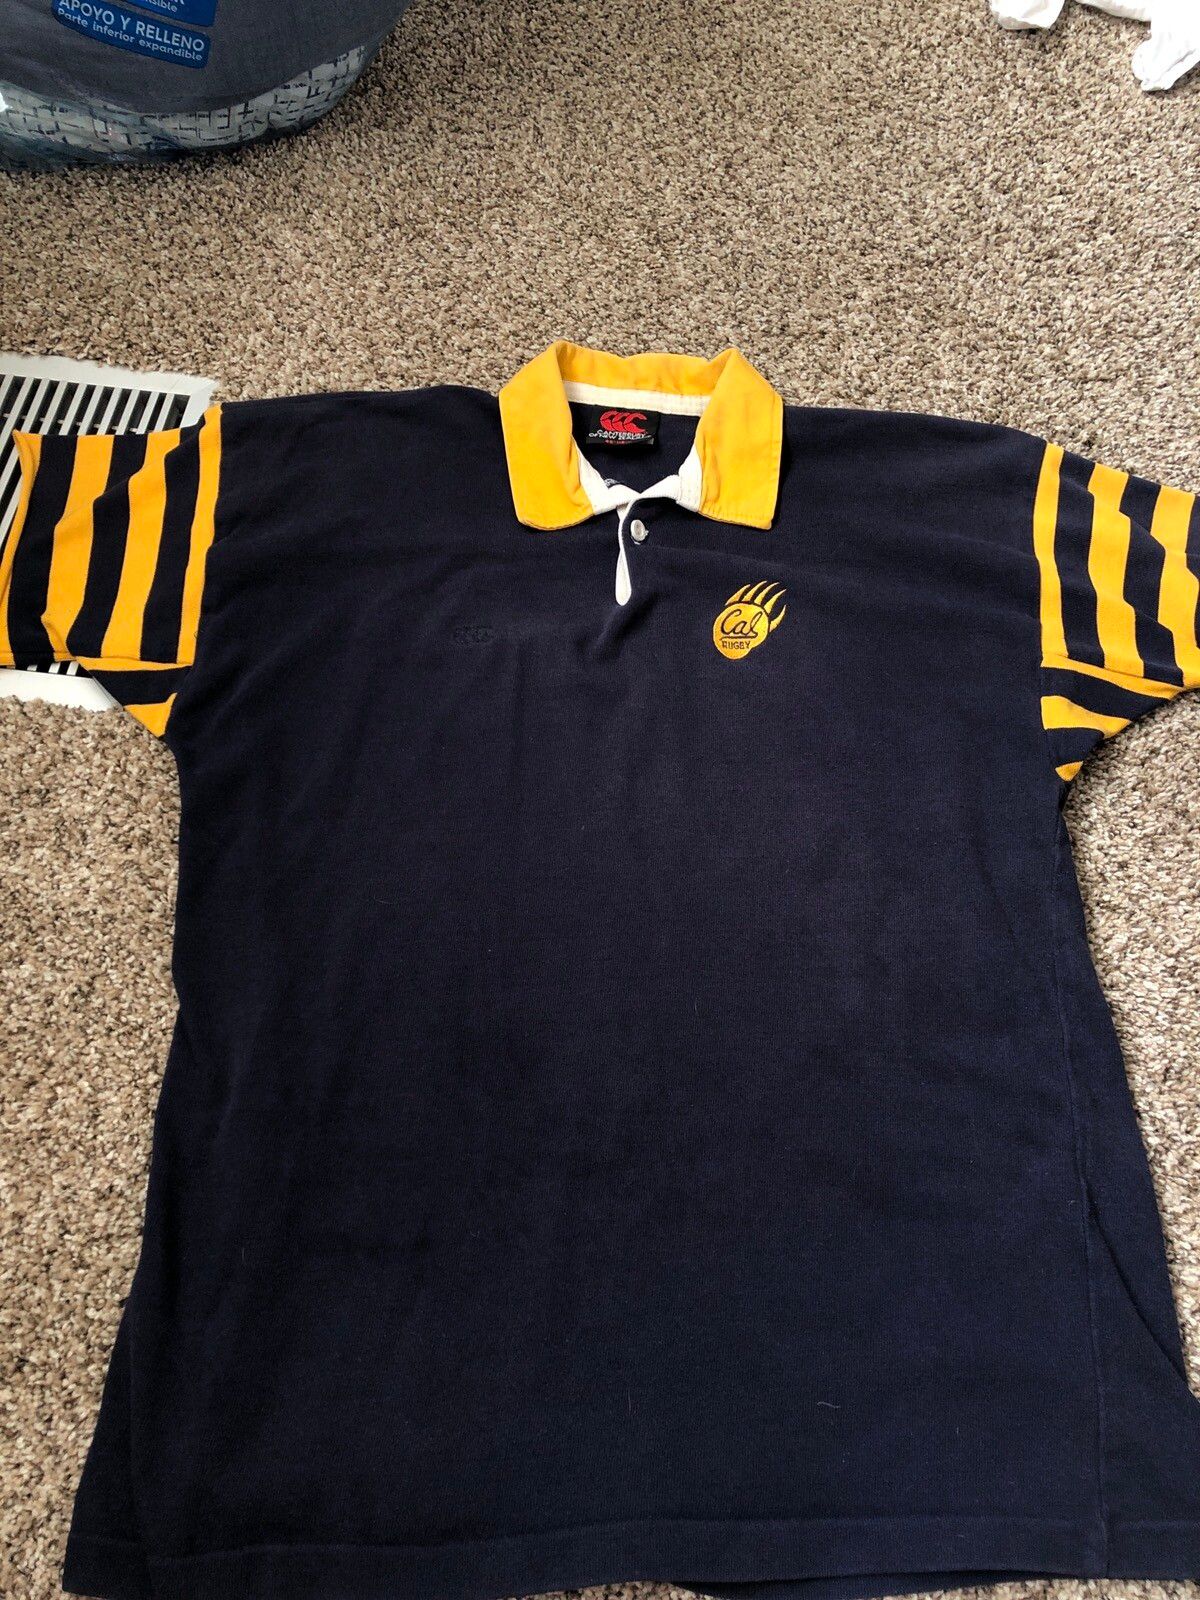 Canterbury Of New Zealand CAL UC Berkeley Vintage Rugby Polo | Grailed